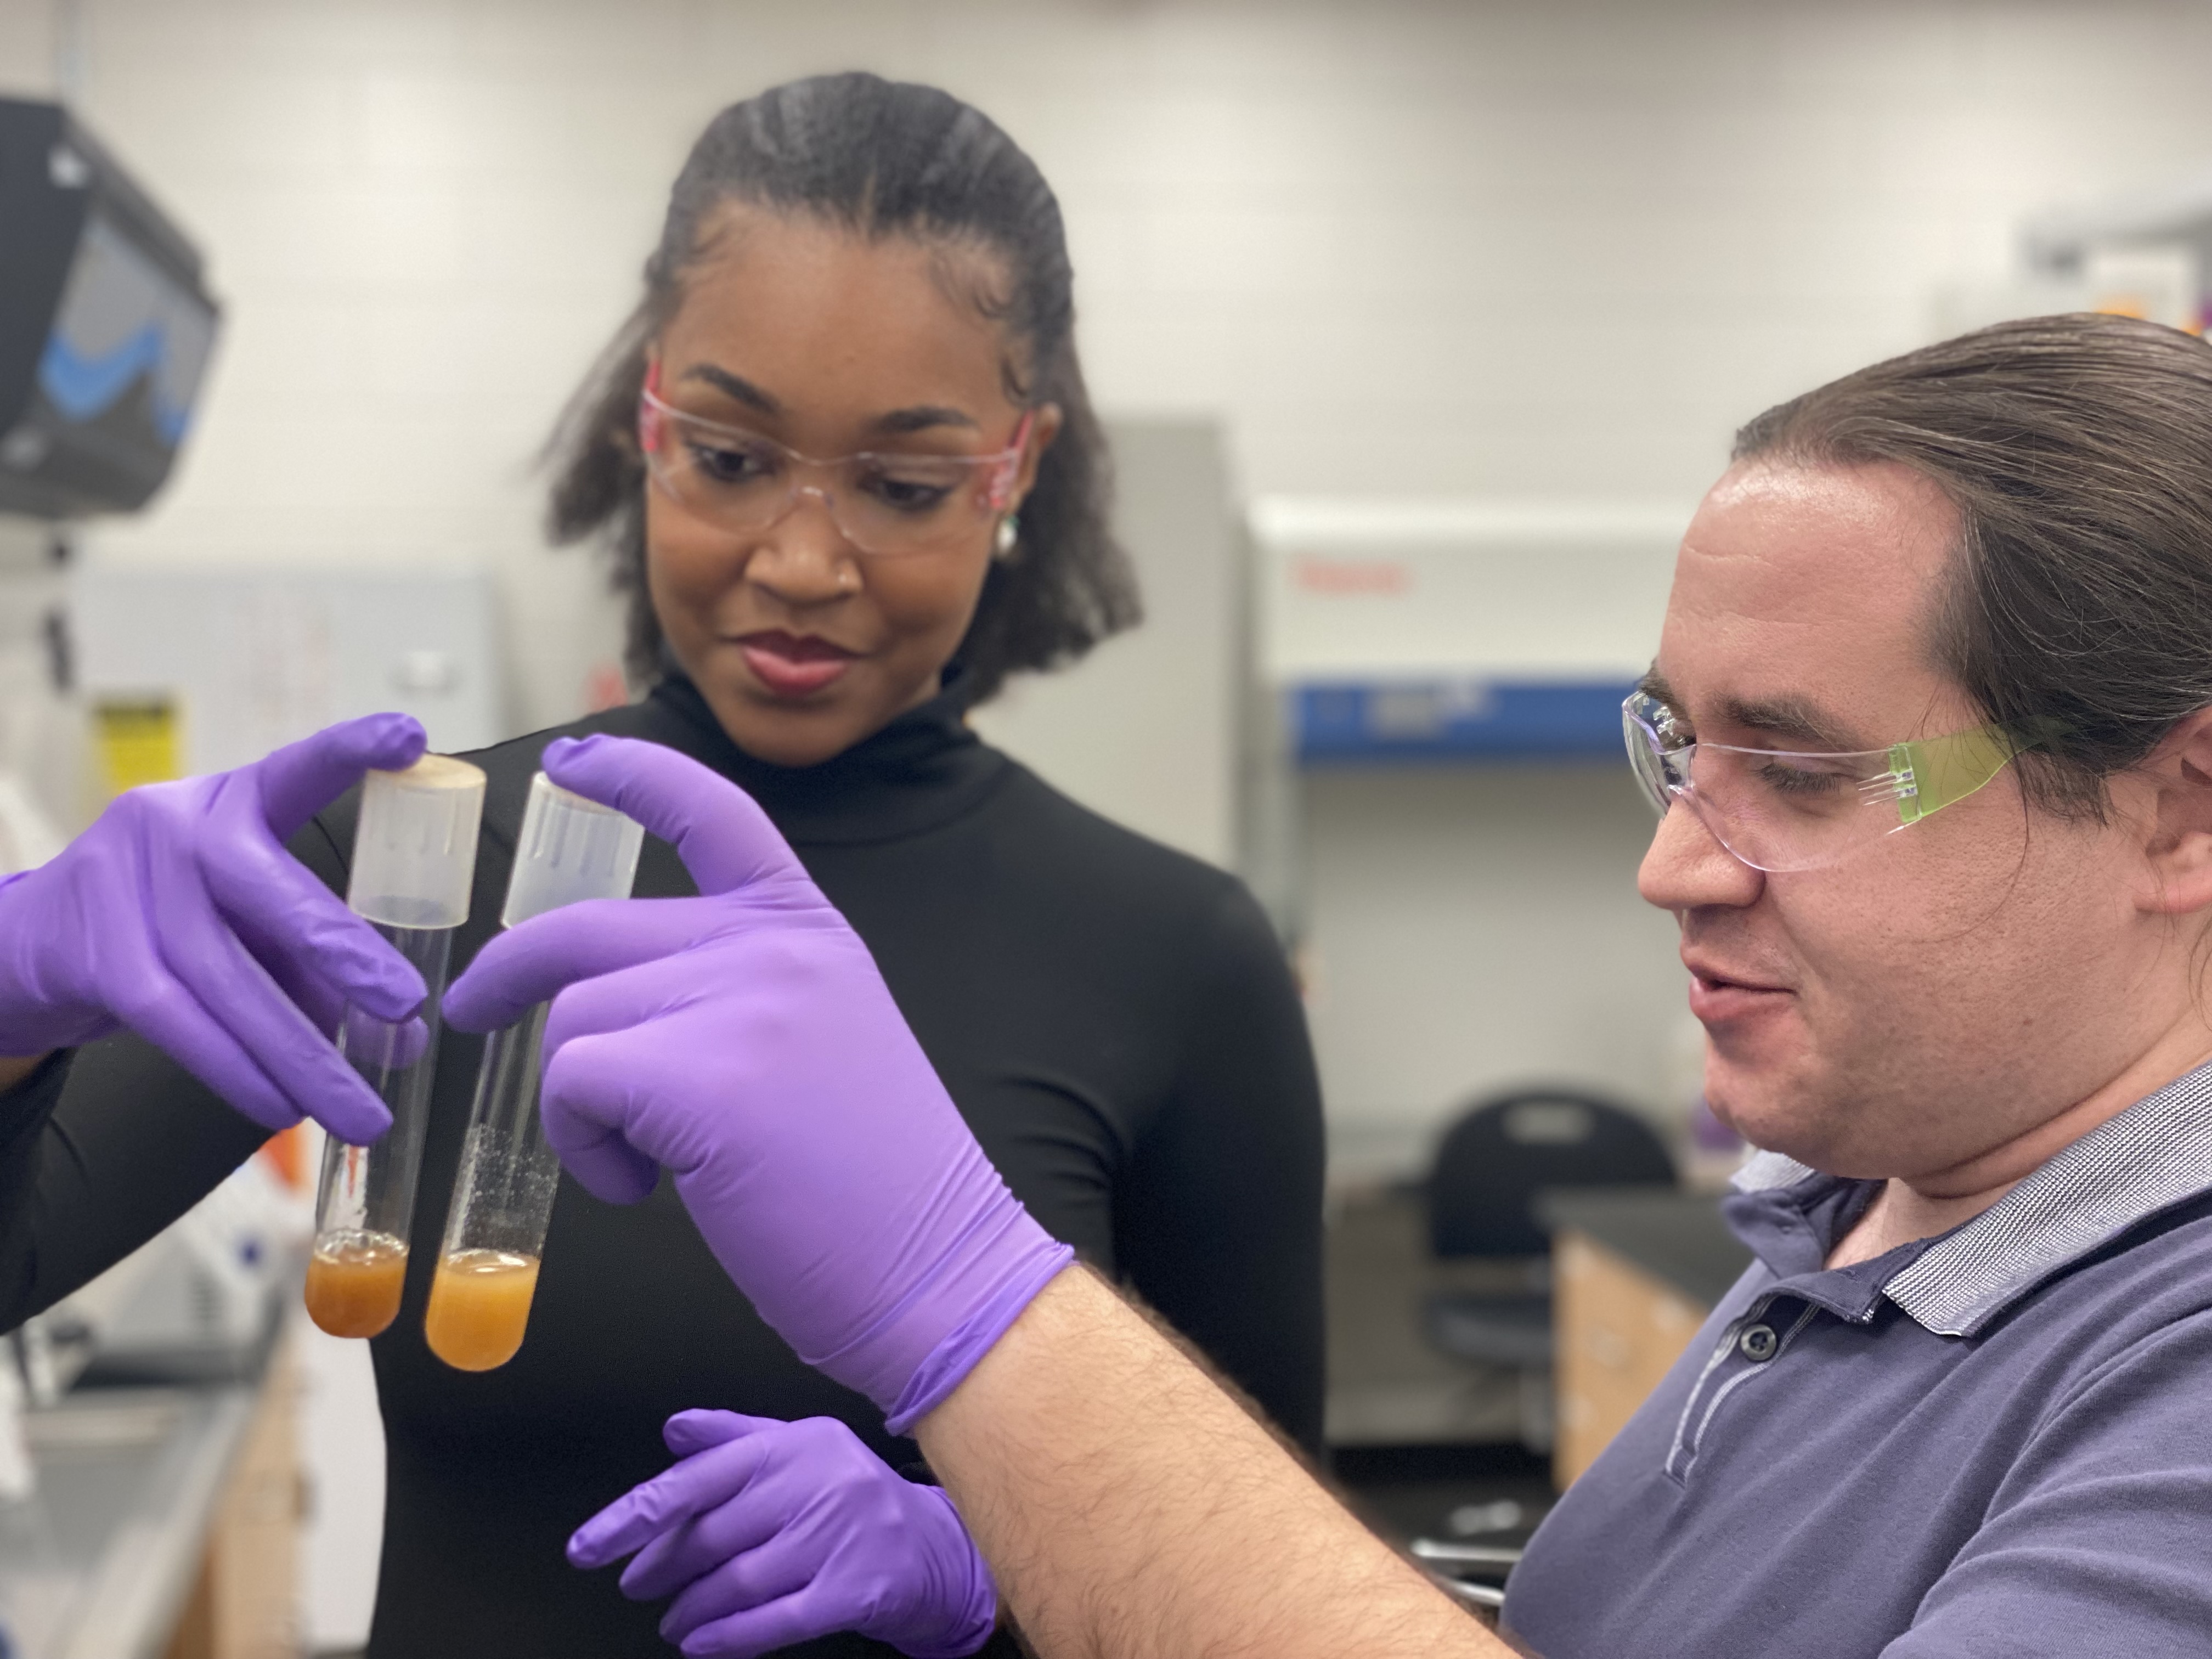 Biology Ph.D. student Autumn Peterson, the study's lead author, looks at yeast cells with Research Scientist Anthony Burnetti, the study's corresponding author, in the lab. (Photo: Audra Davidson)